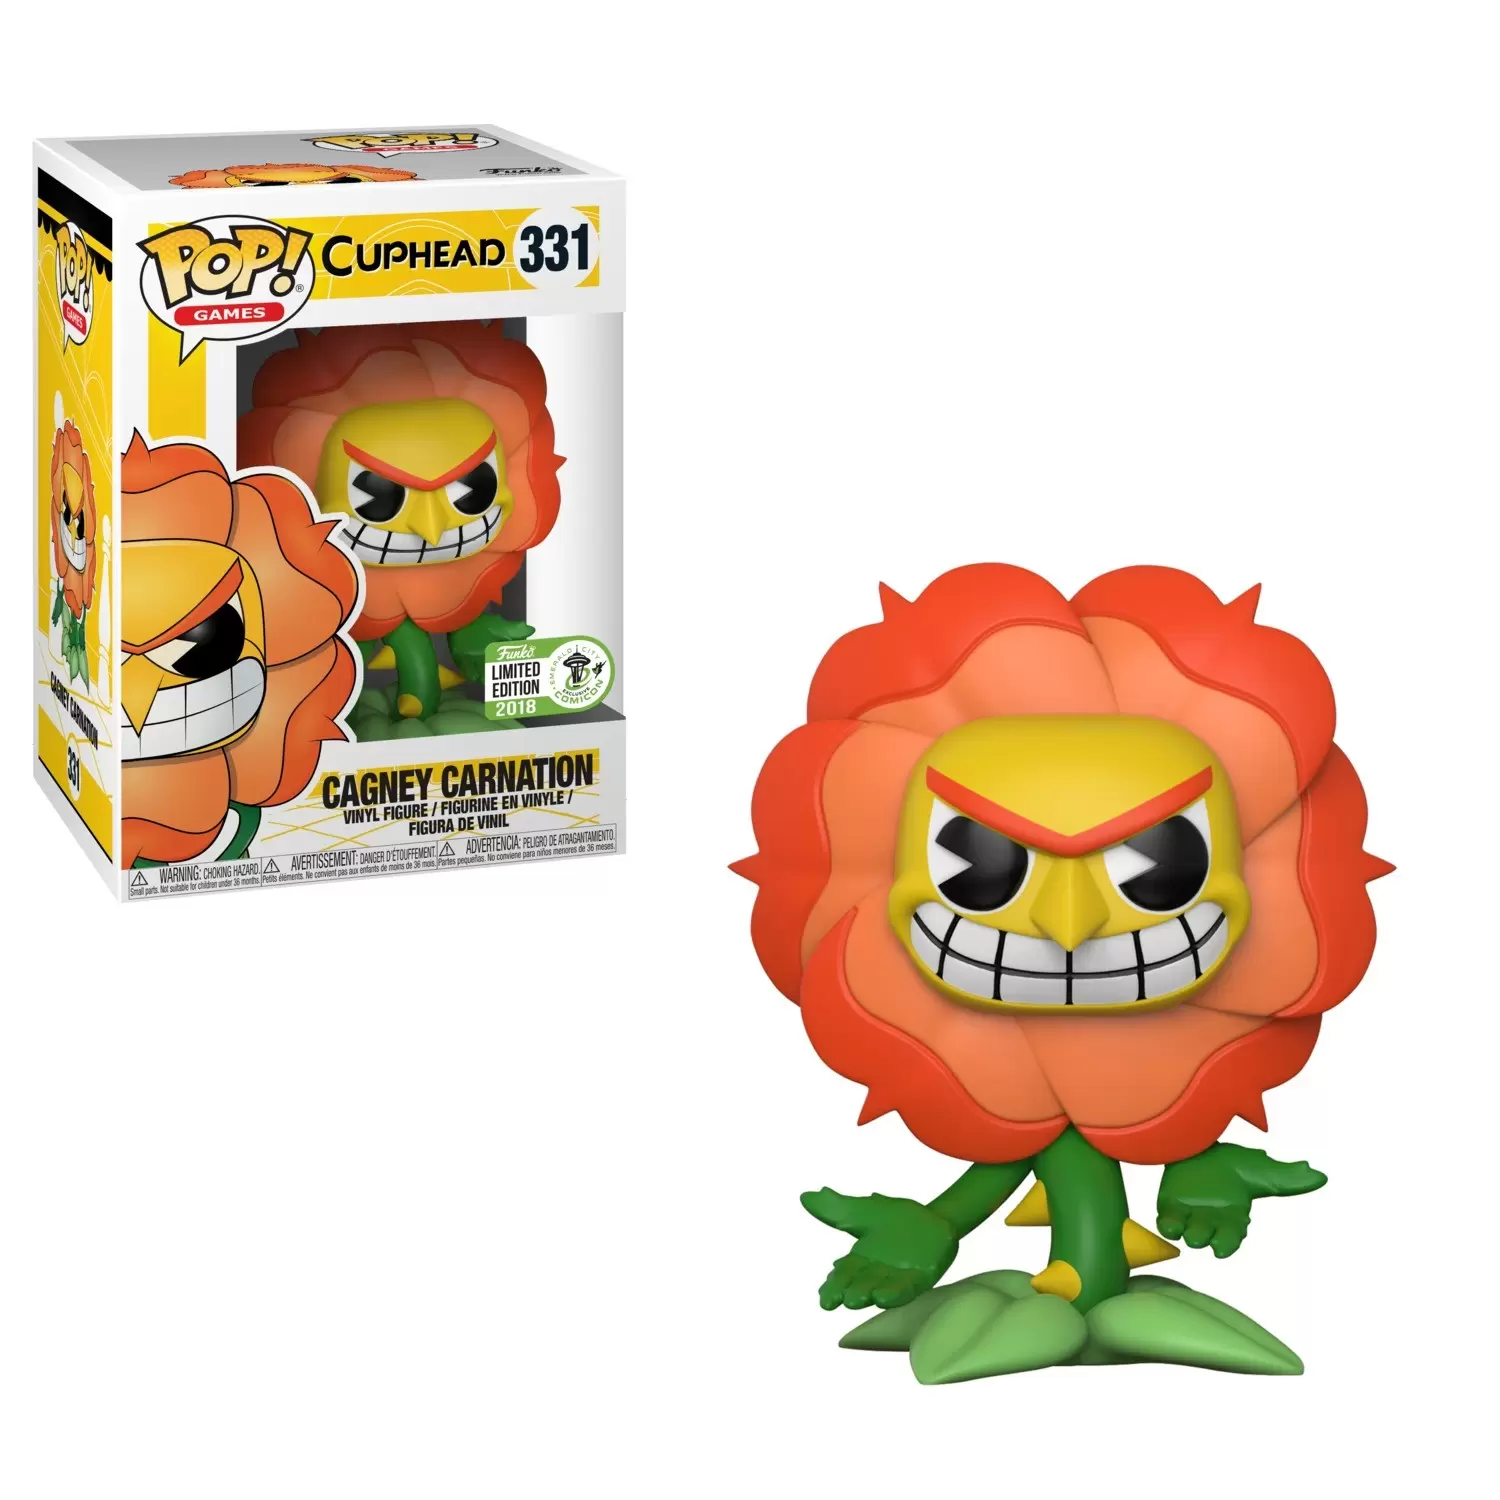 POP! Games - Cuphead - Cagney Carnation